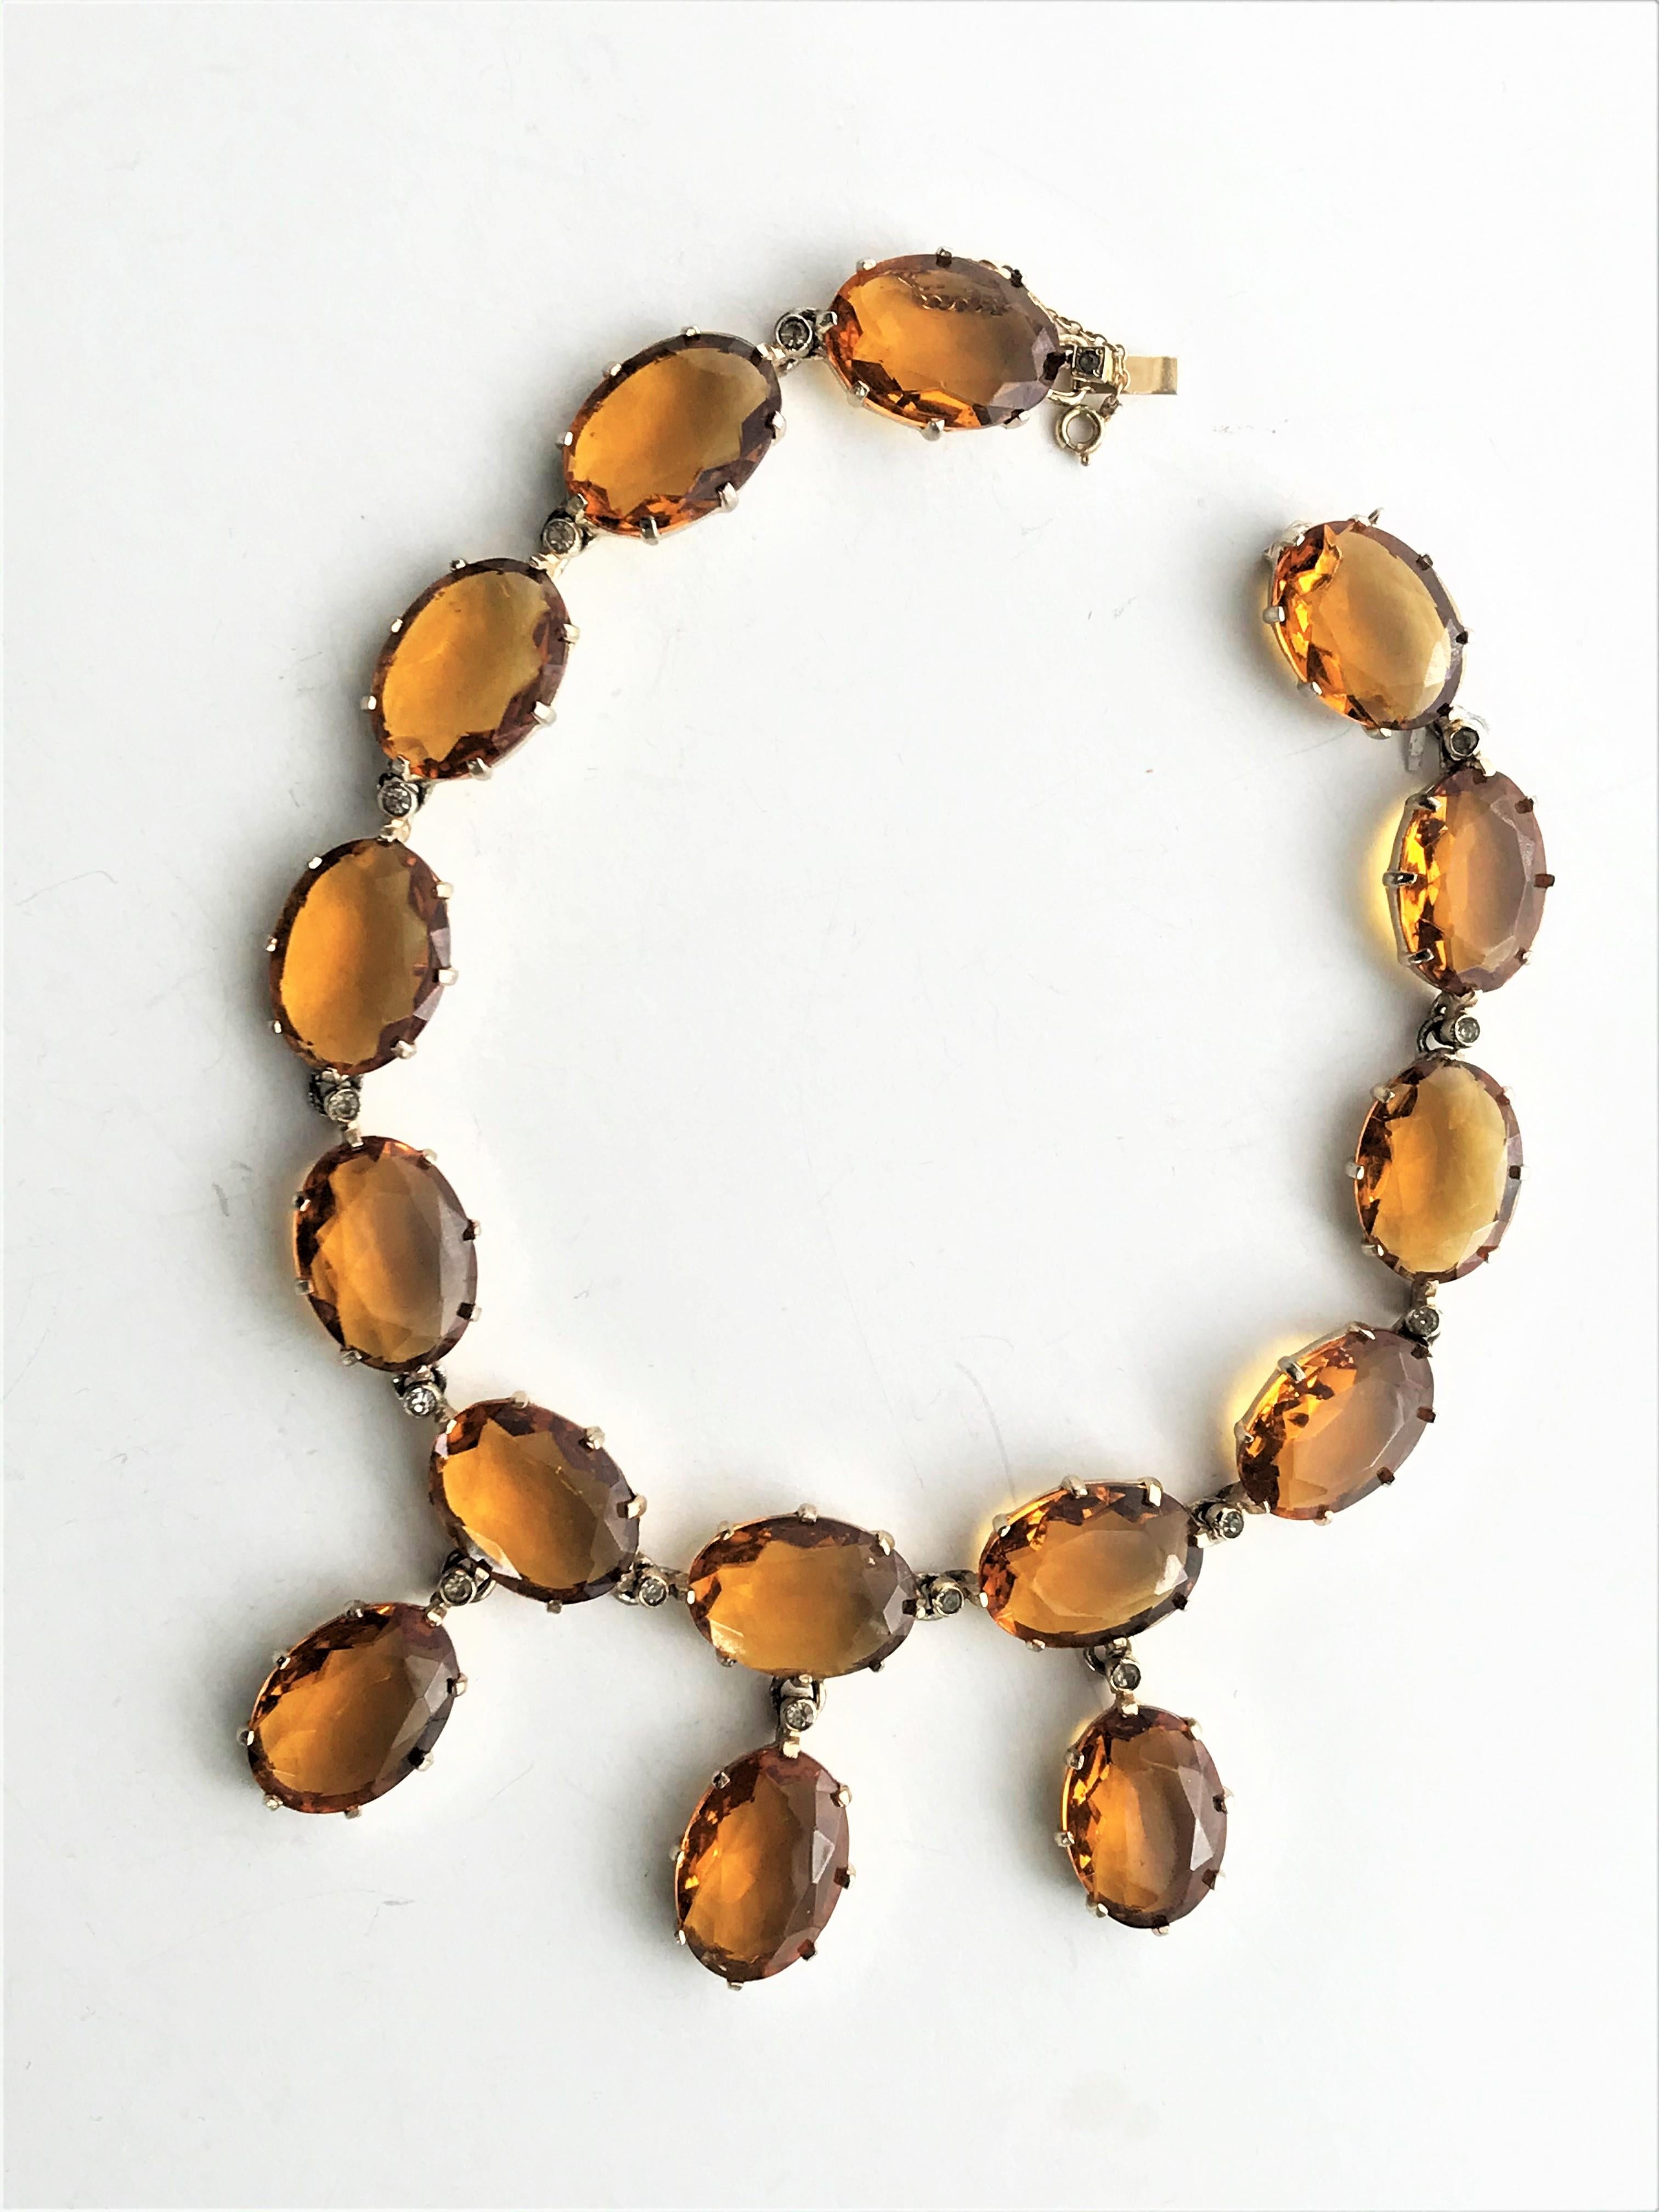 Marquise Cut Vintage necklace, amber colored rhinestones 1940s gold plated